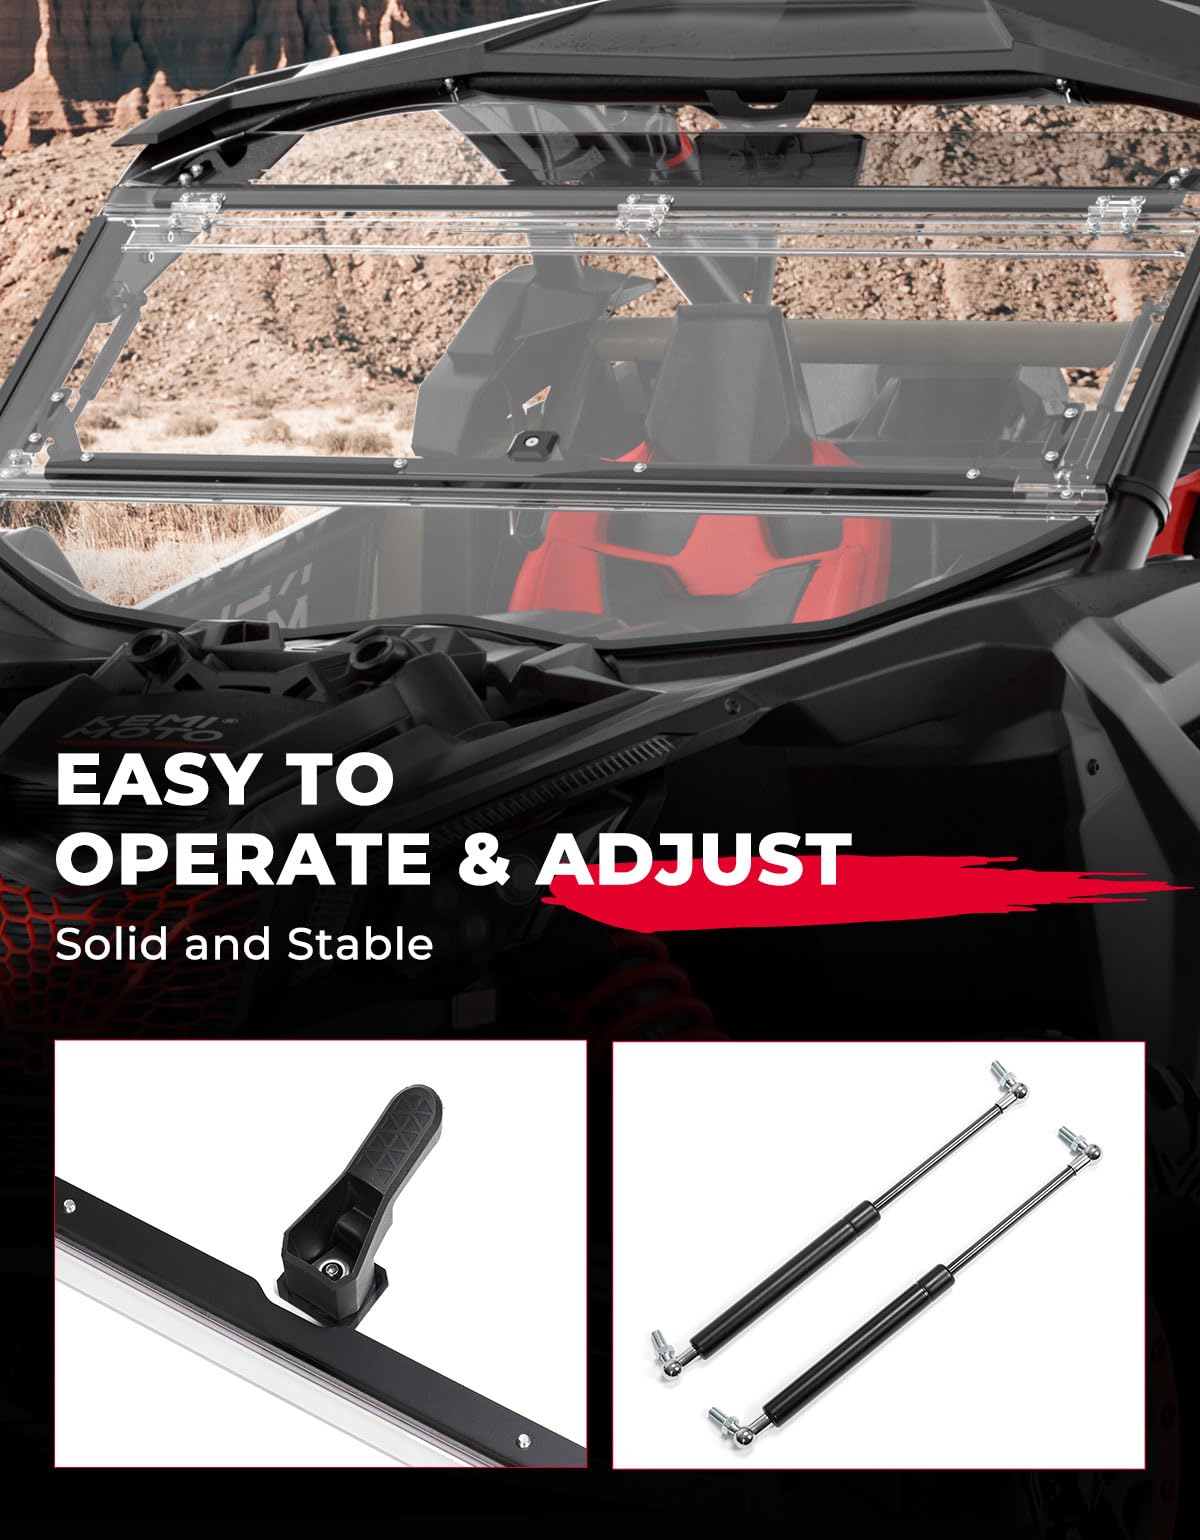 Upgraded Scratch Resistant Flip Windshield for Can-Am Maverick X3/X3 MAX - Kemimoto